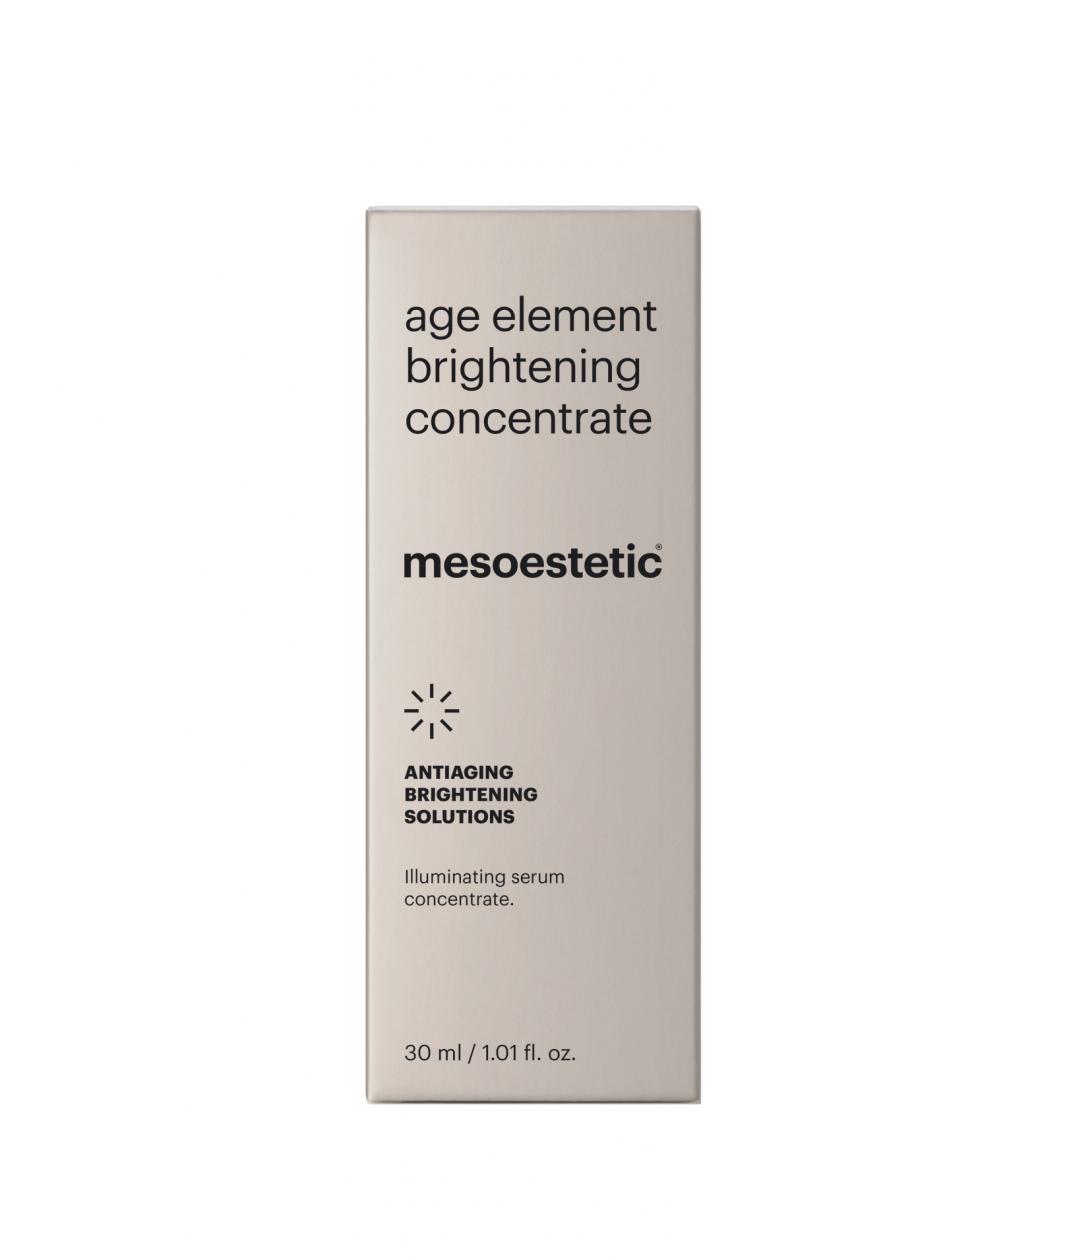 Mesoestetic age element brightening concentrate 30ml